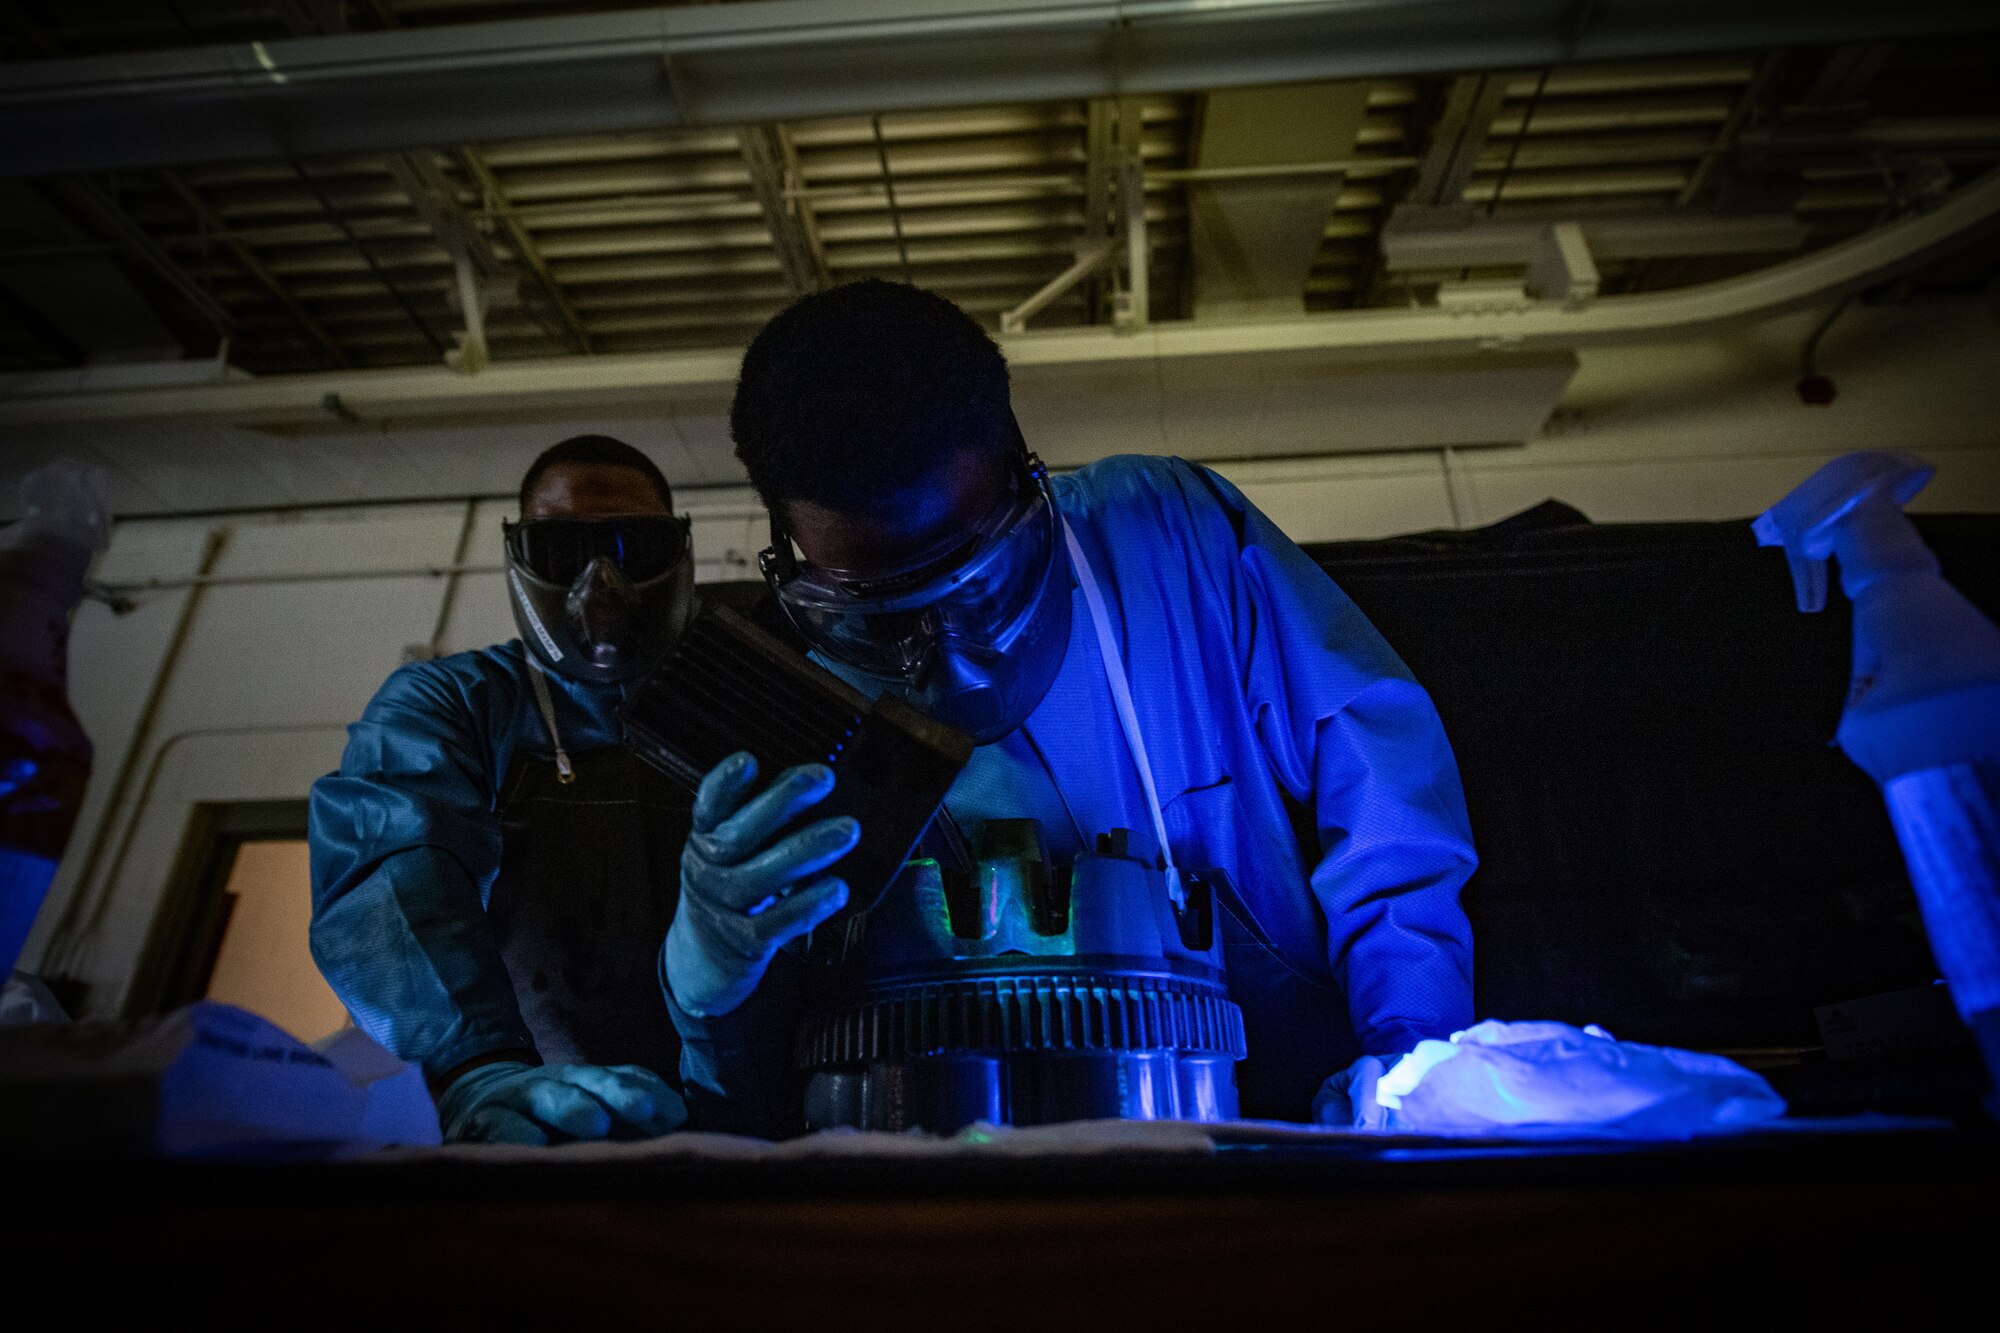 U.S. Air Force Airman Roderick Dennis, a 23rd Maintenance Squadron nondestructive inspection apprentice, inspect an A-10 Thunderbolt II GAU-8 weapons system with a blacklight for cracks and structural integrity during a magnetic particle inspection at Moody Air Force Base, Georgia, April 5, 2022. Various types of dyes and florescent lighting are used to uncover discrepancies that are unable to be seen by the naked eye. (U.S. Air Force photo by Staff Sgt. Melanie A. Bulow-Gonterman)